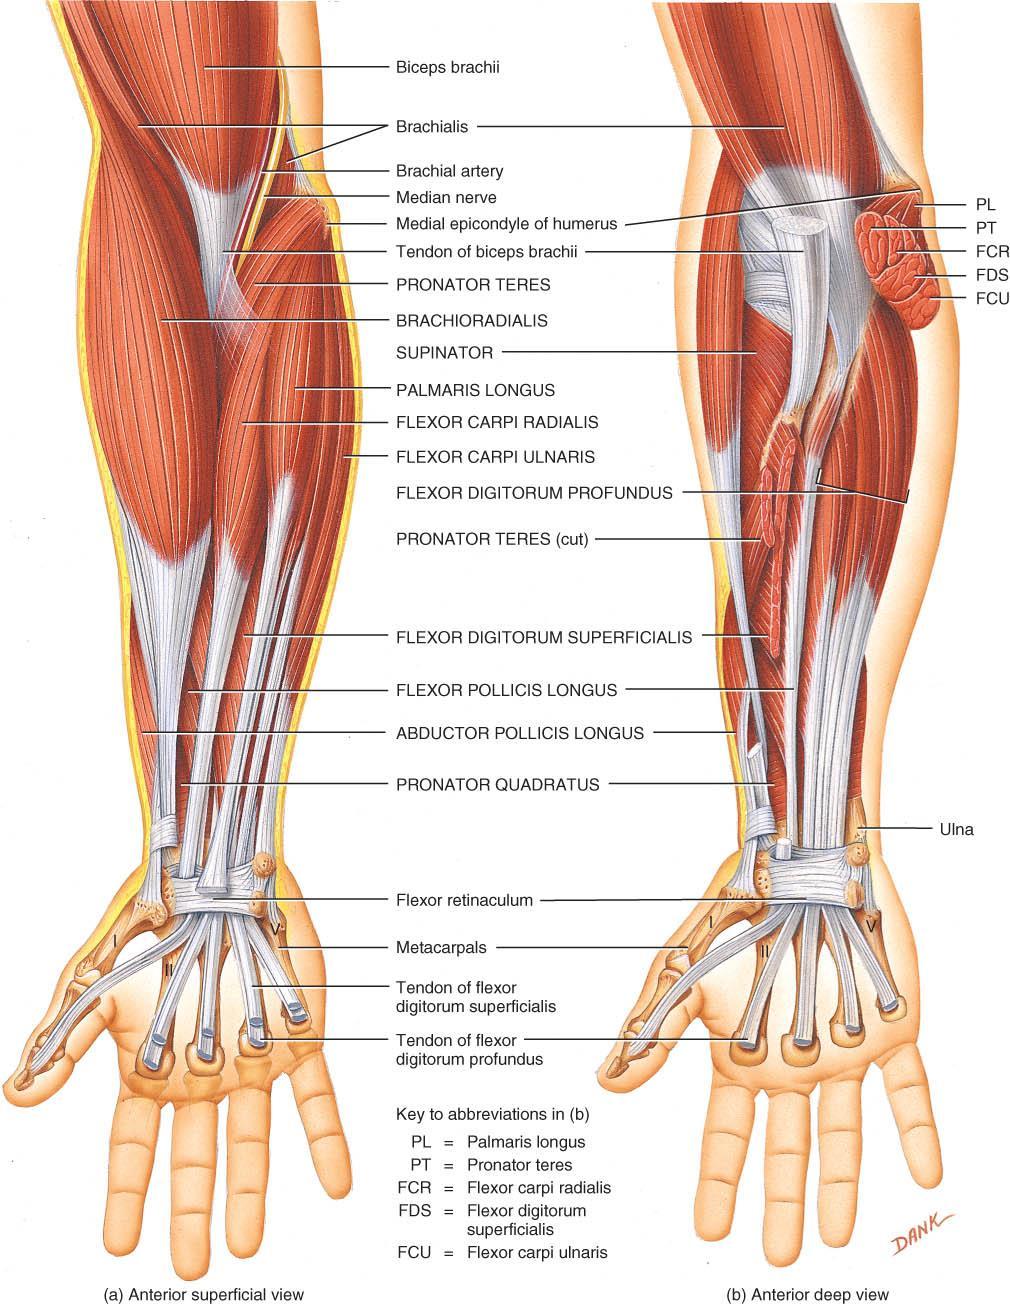 MUSCLE THAT PRONATE & FLEX o Pronator teres medial epicondyle to radius so contraction turns palm of hand down